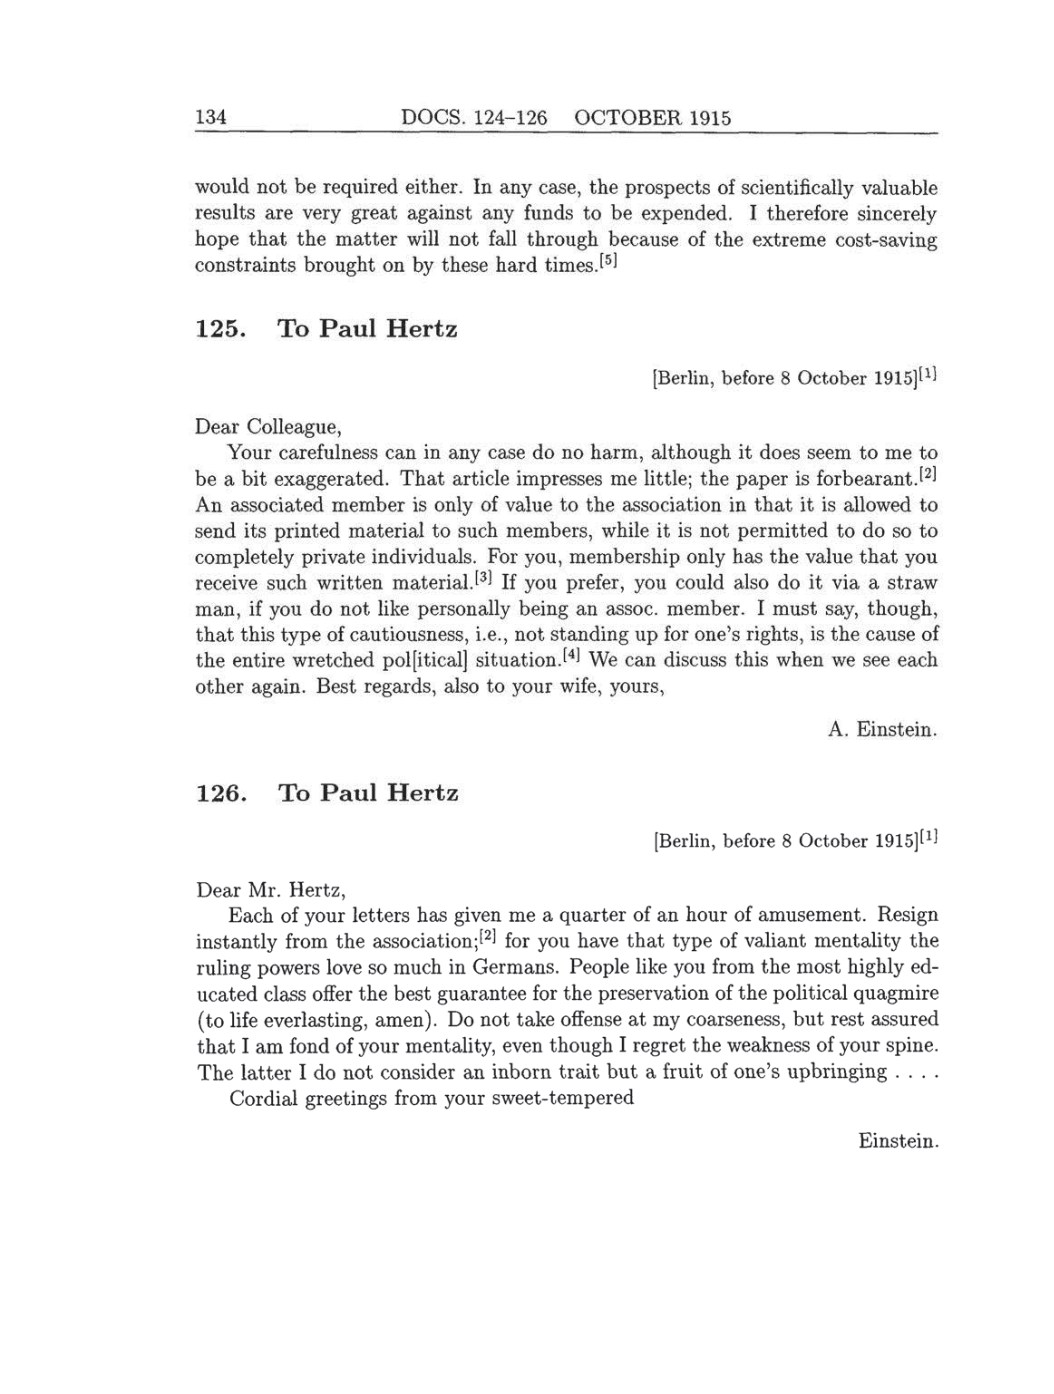 Volume 8: The Berlin Years: Correspondence, 1914-1918 (English translation supplement) page 134